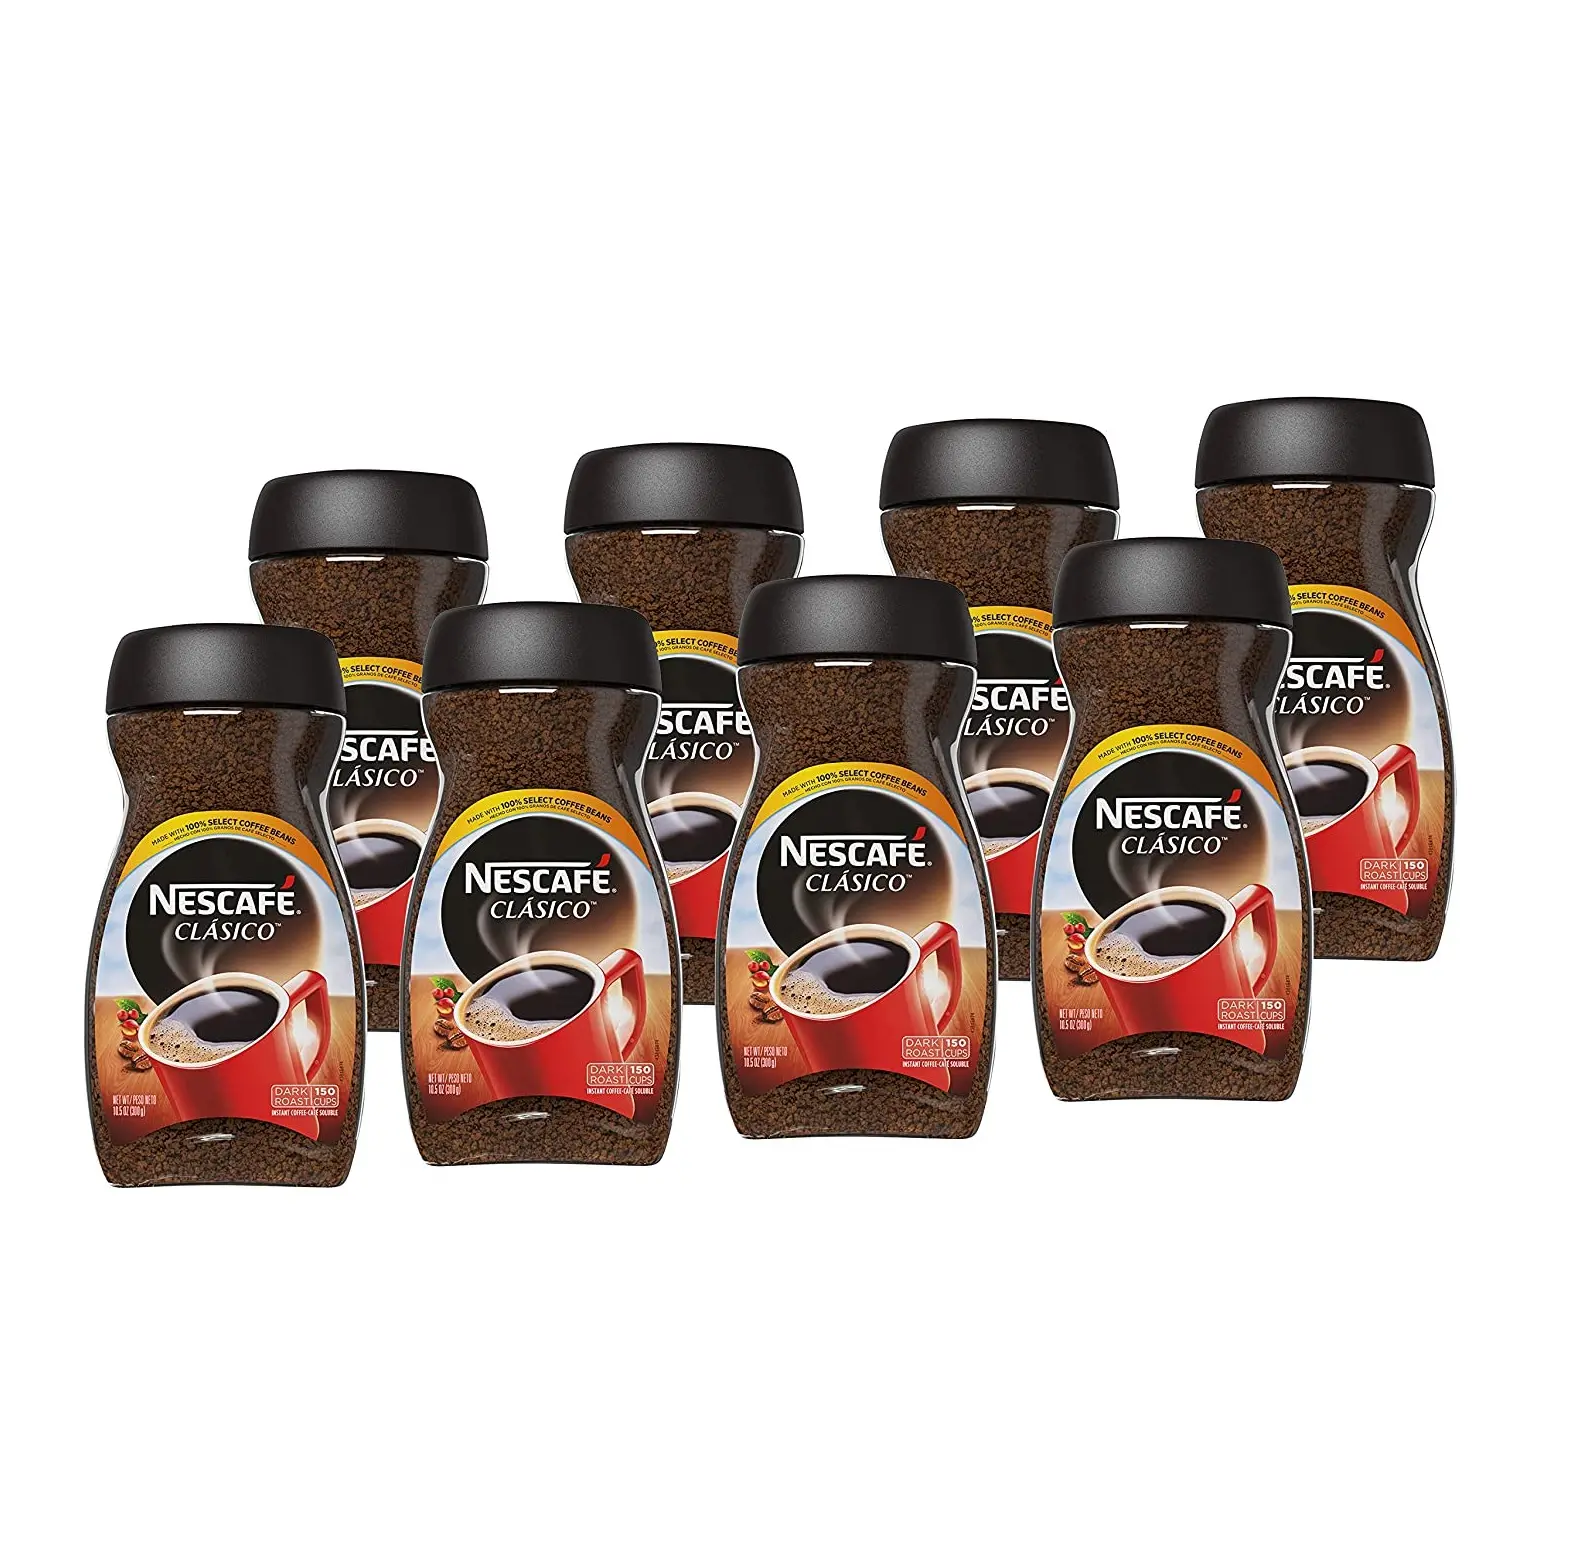 Nescafe Instant Coffee Classic/Nescafe Classic 3 in 1 for Export World Wideのバルク在庫あり